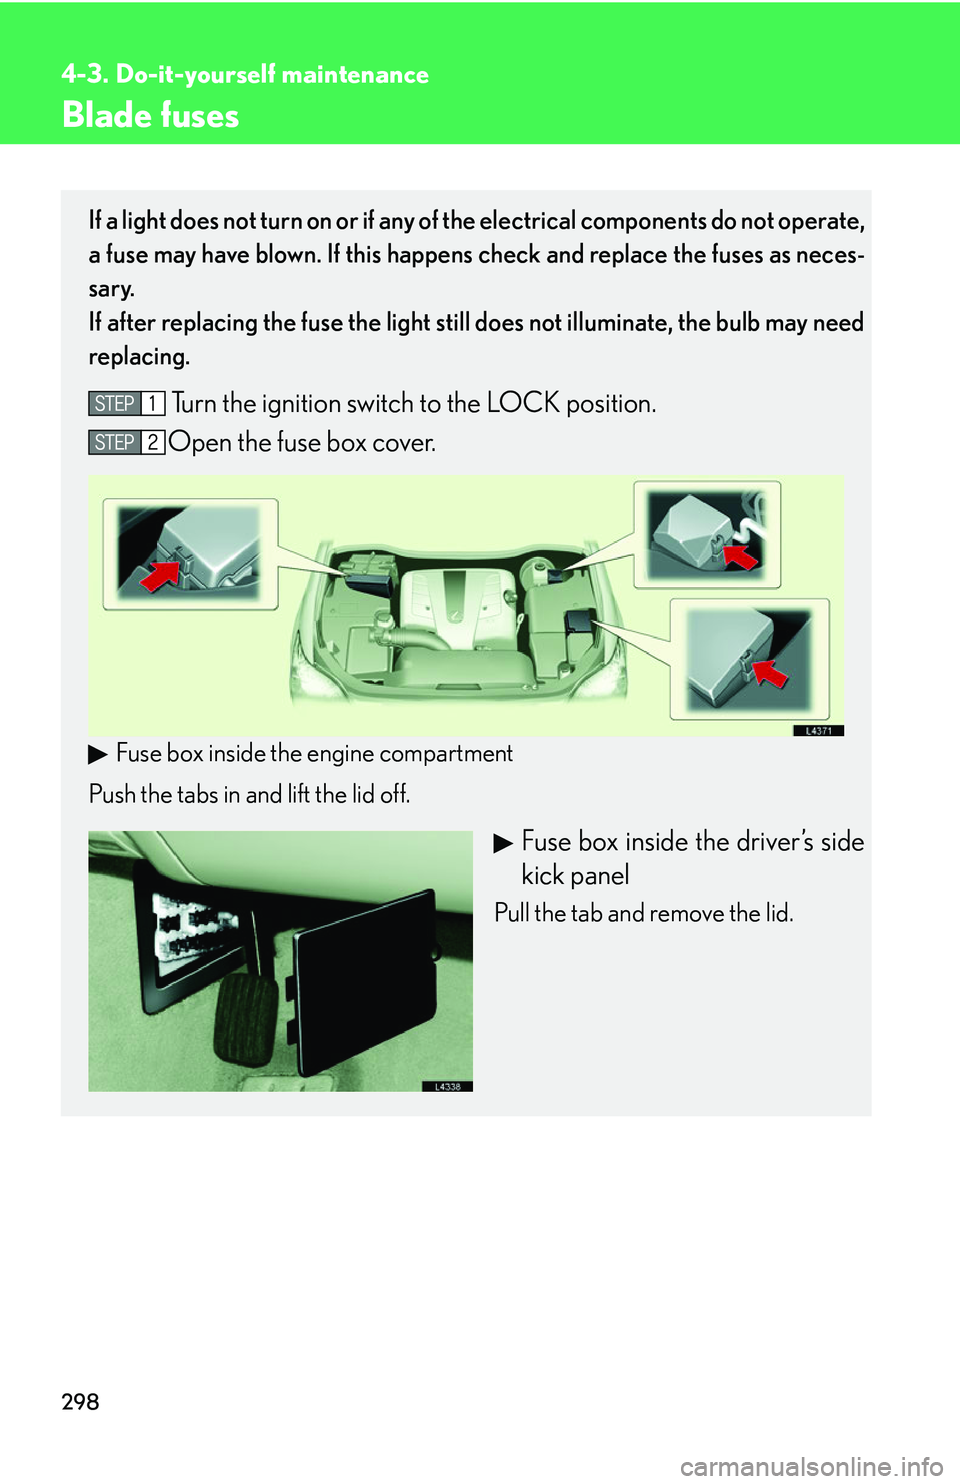 LEXUS LS430 2006  Owners Manual 298
4-3. Do-it-yourself maintenance
Blade fuses
If a light does not turn on or if any of the electrical components do not operate, 
a fuse may have blown. If this happens check and replace the fuses a